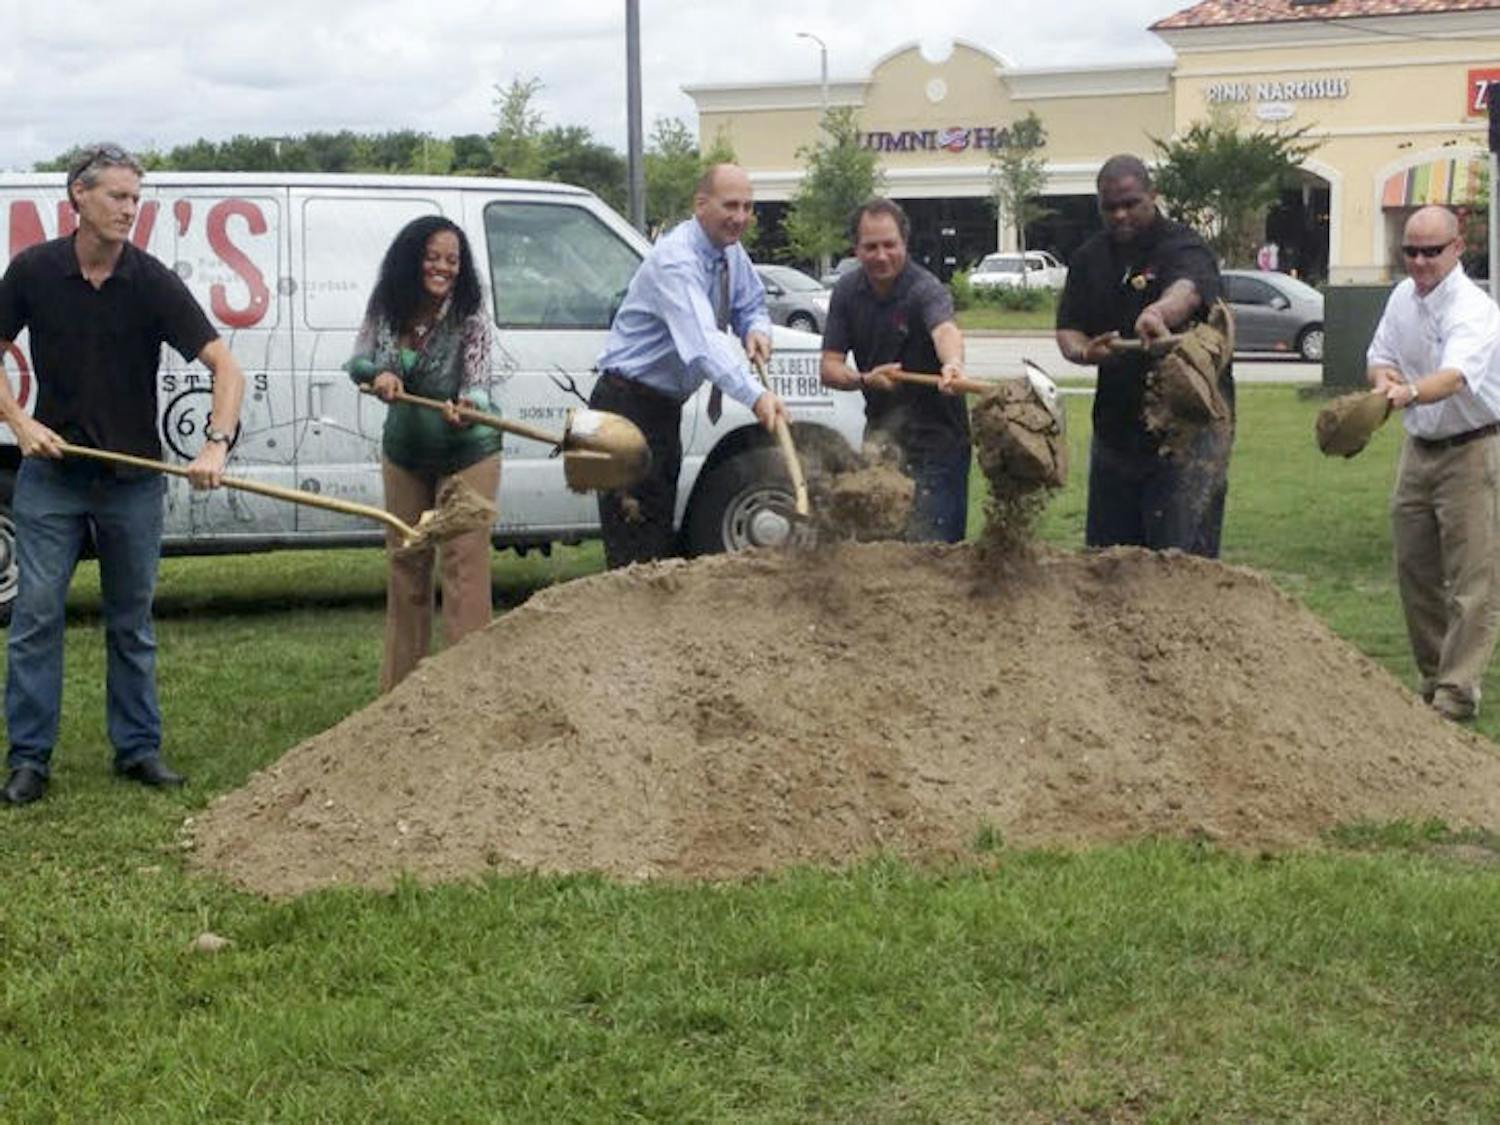 &nbsp;
Proprietors break ground on the new Sonny's Real Pit BBQ prototype that will be built on Archer Road, outside of the current Sonny’s on Friday.
&nbsp;